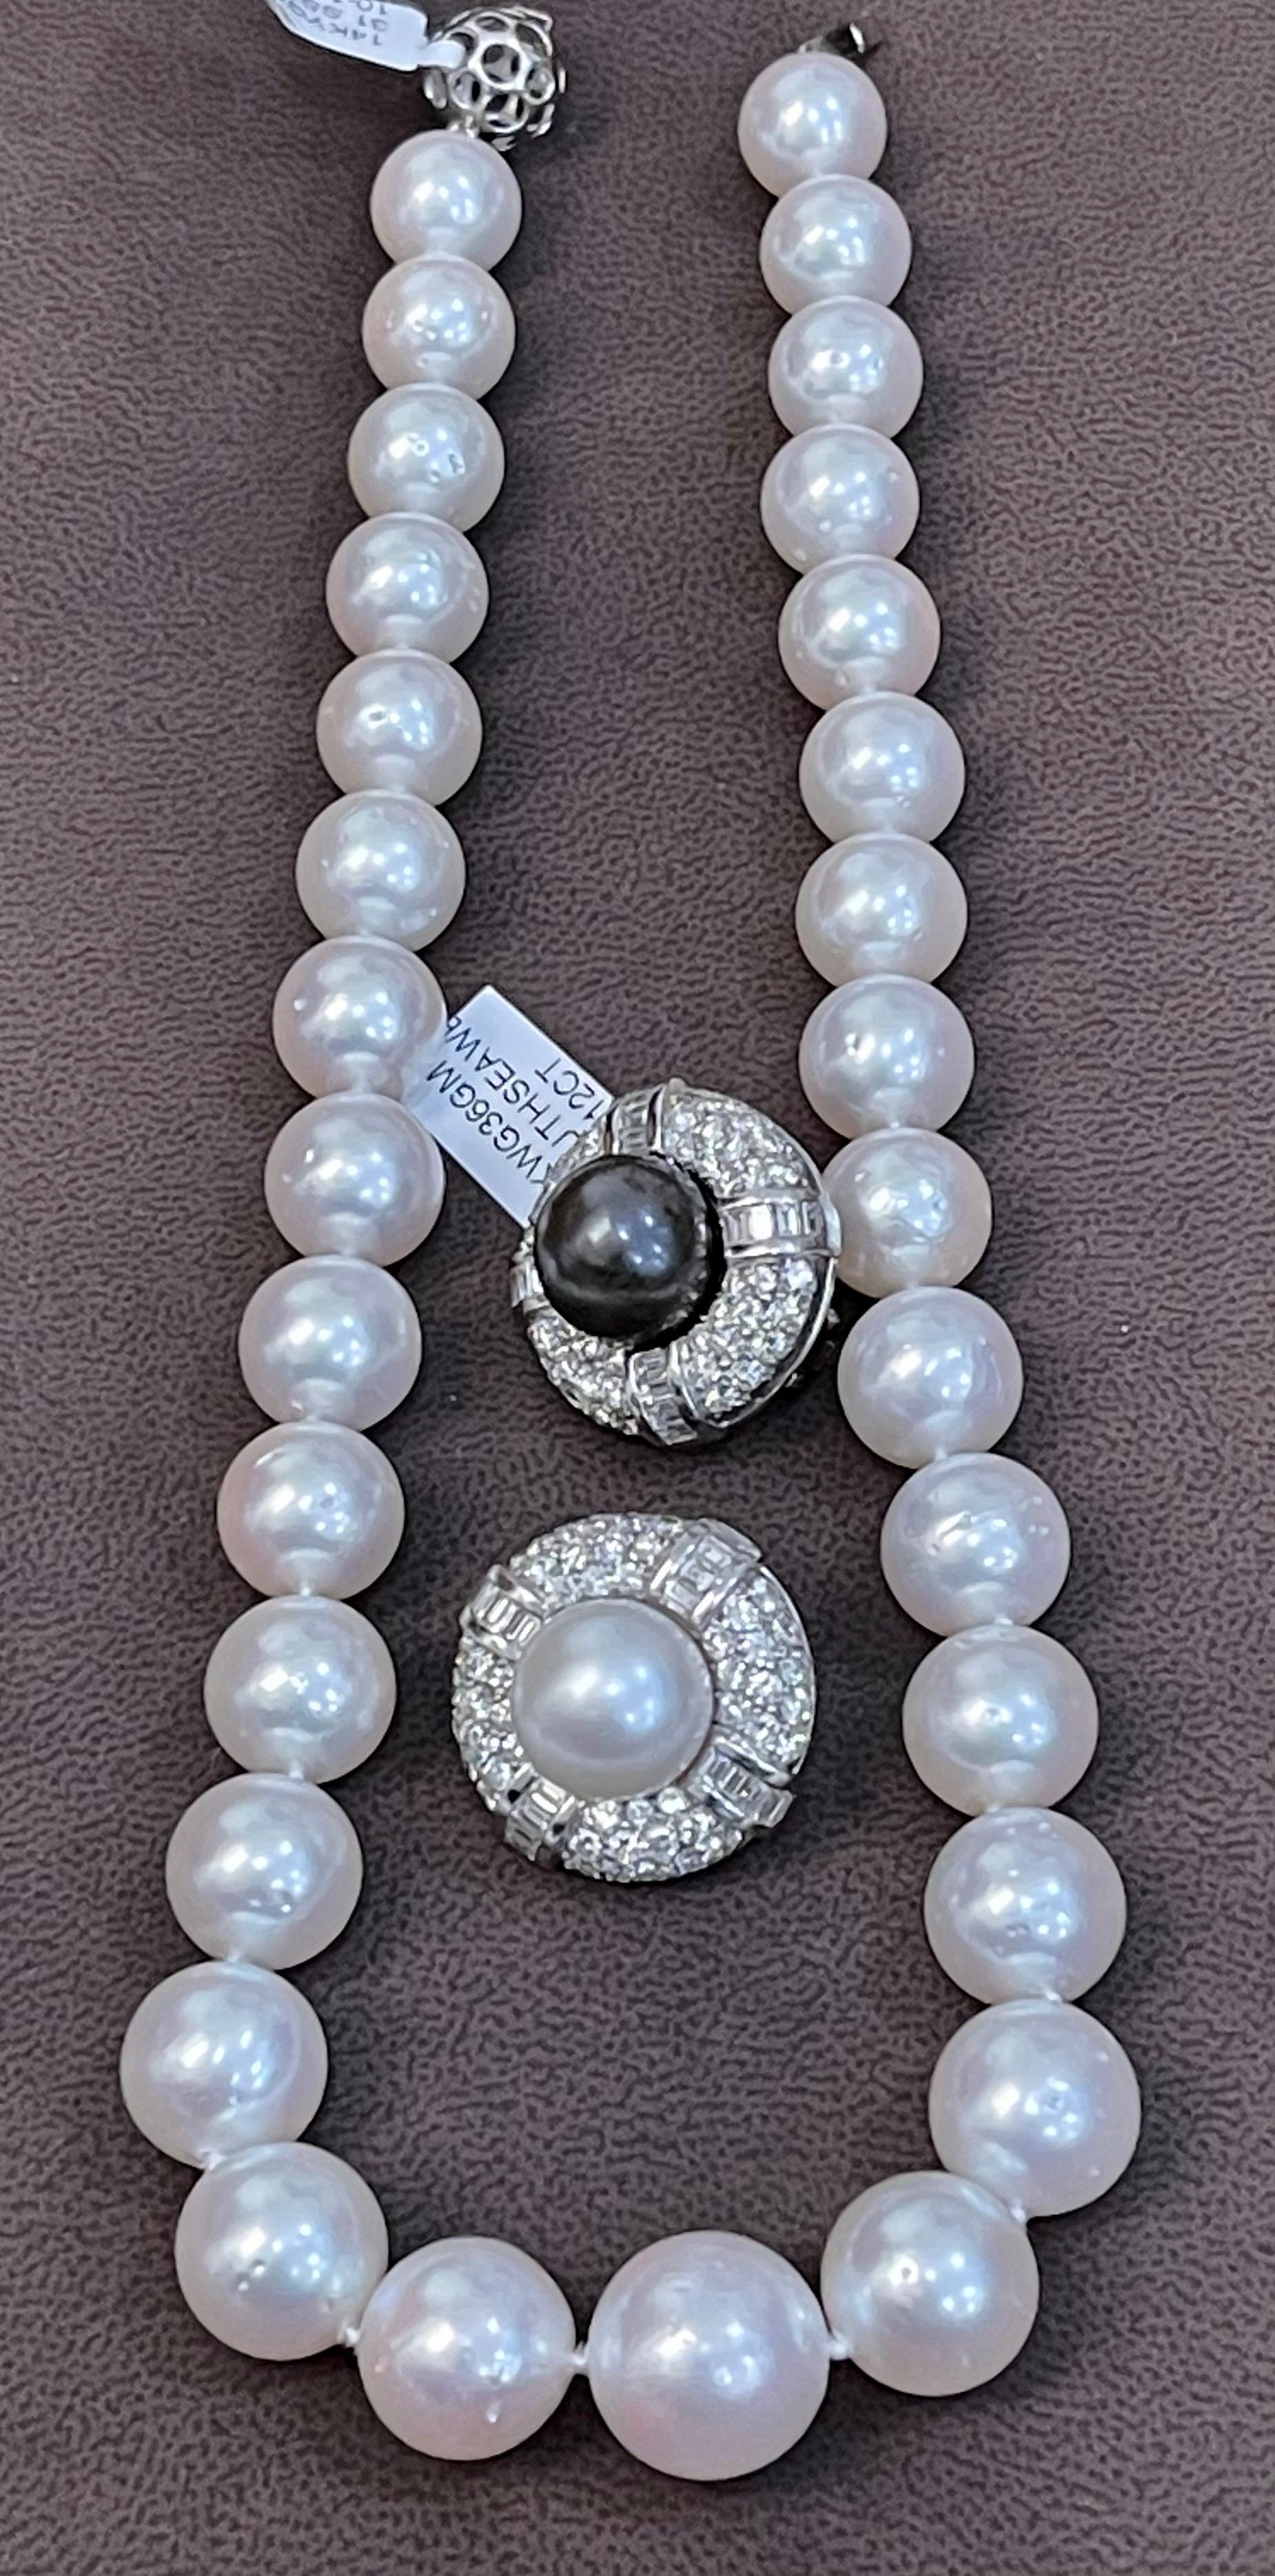 White South Sea Pearls Long Strand Necklace 14 Karat Gold Clasp For Sale 3